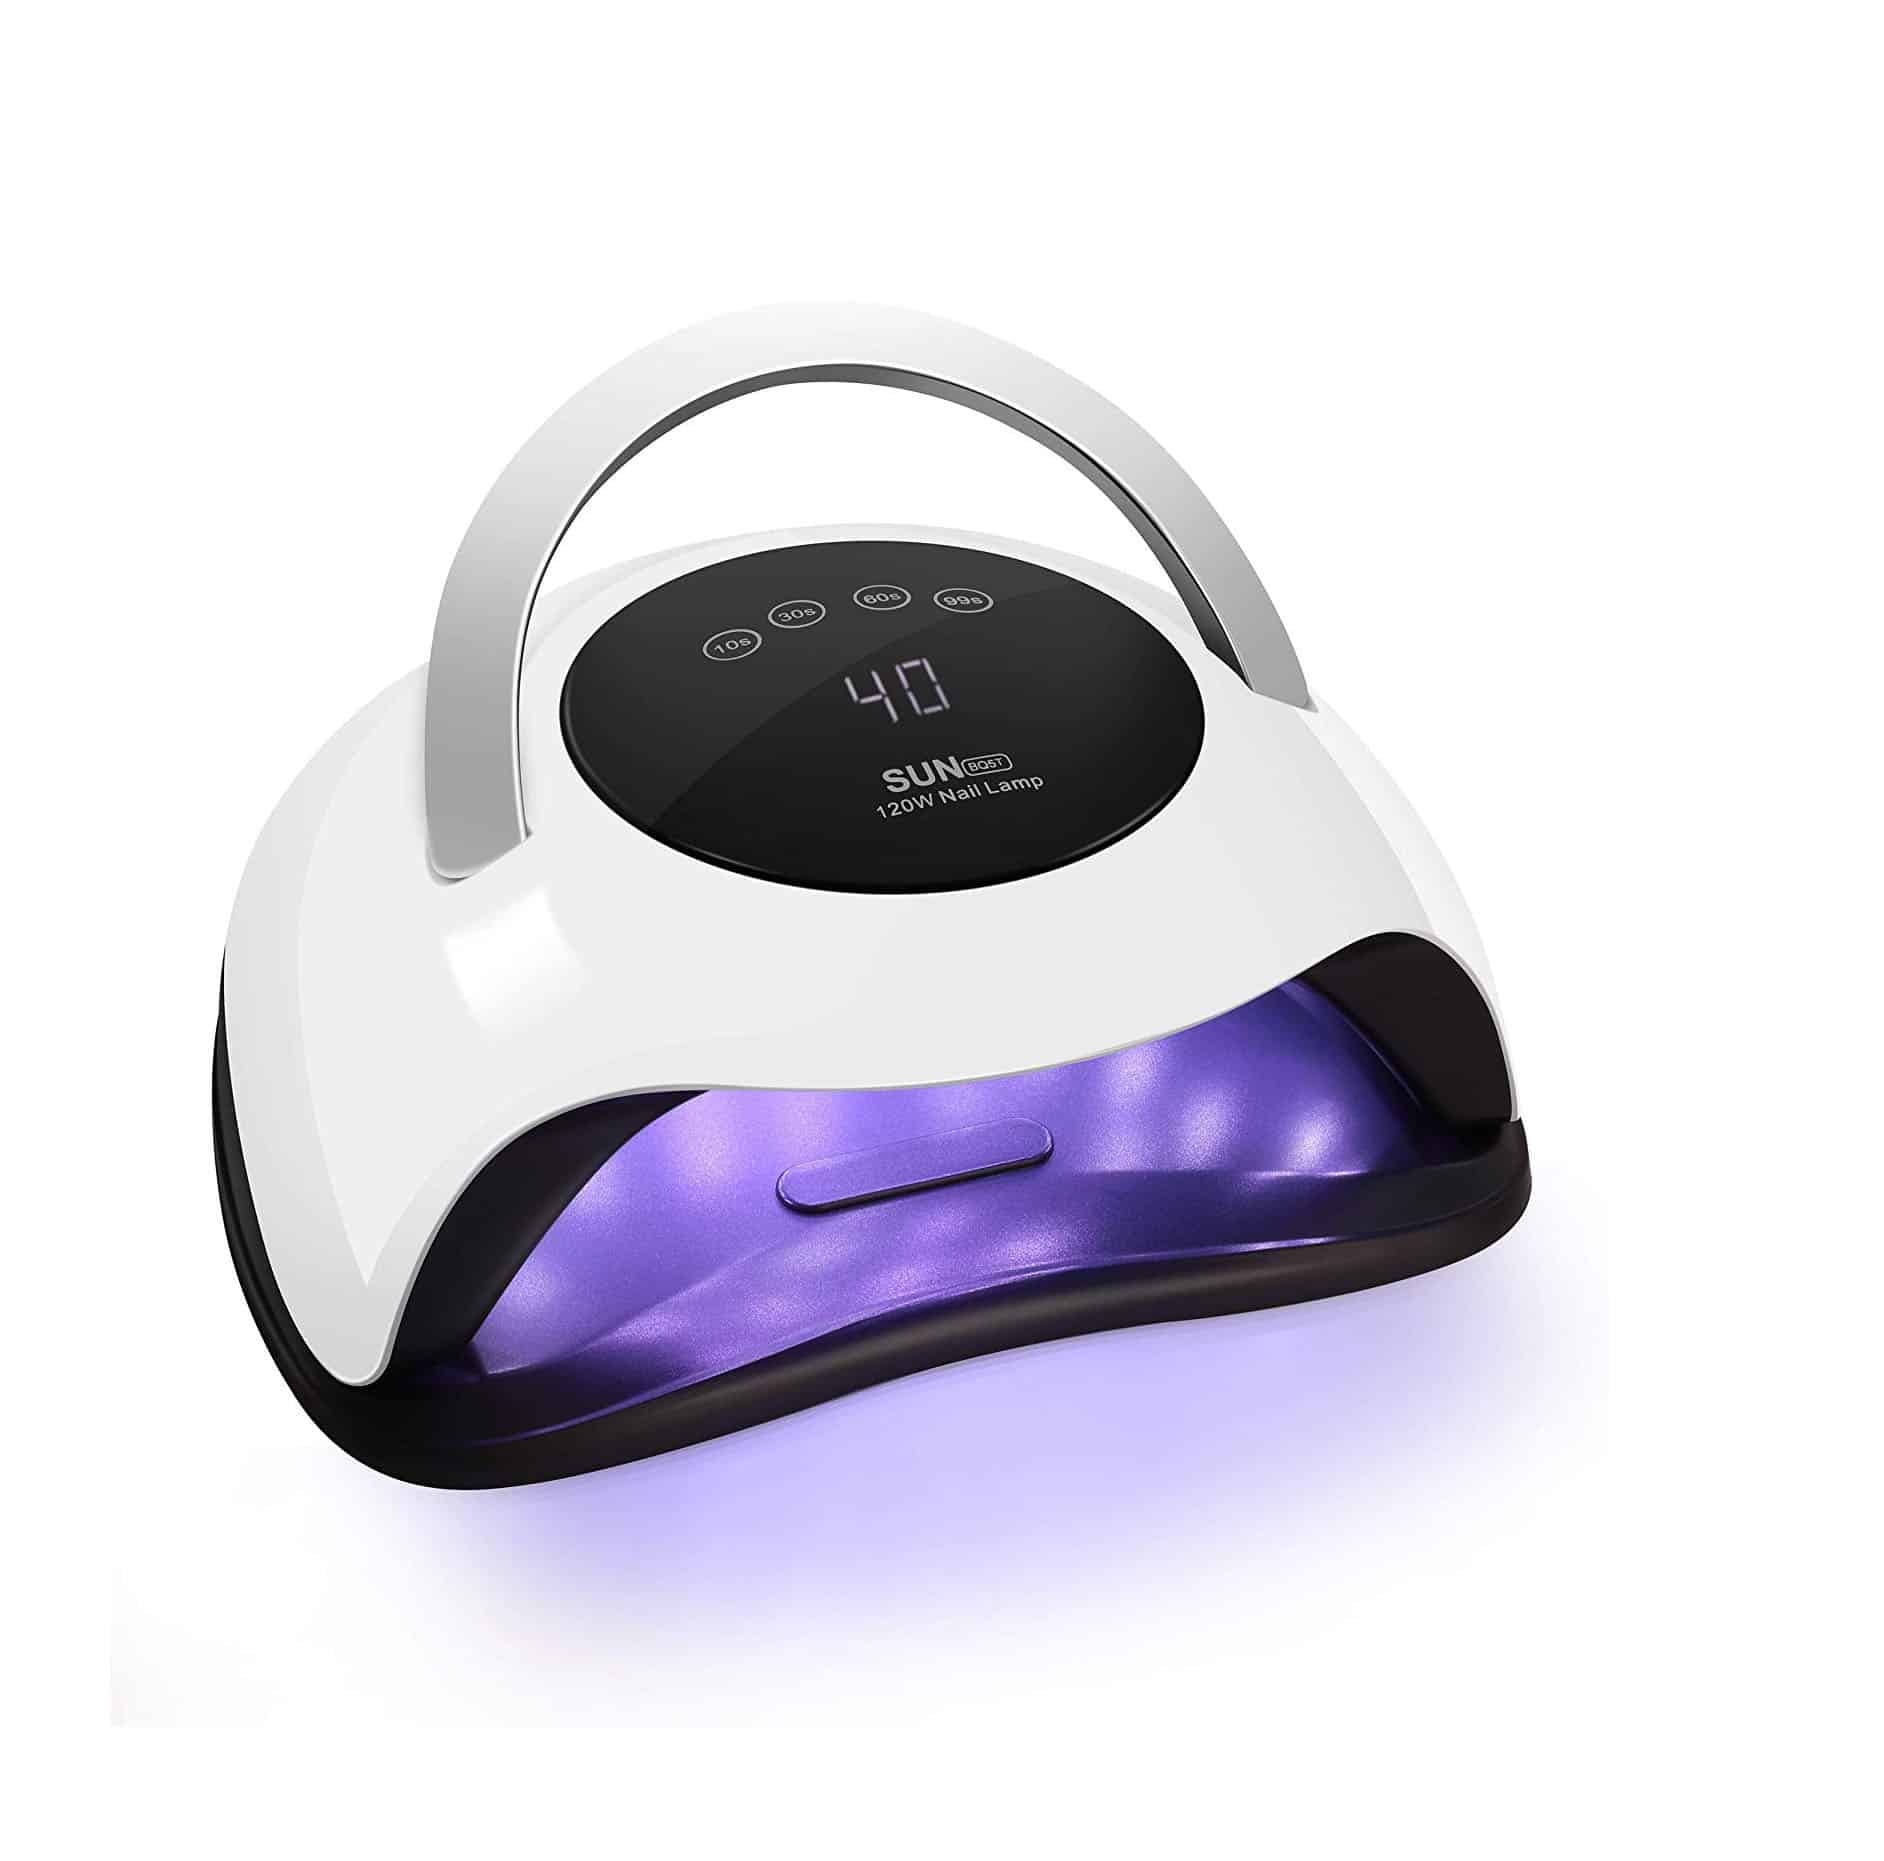 Top 10 Best Nail Dryers in 2021 Reviews | Buyer's Guide